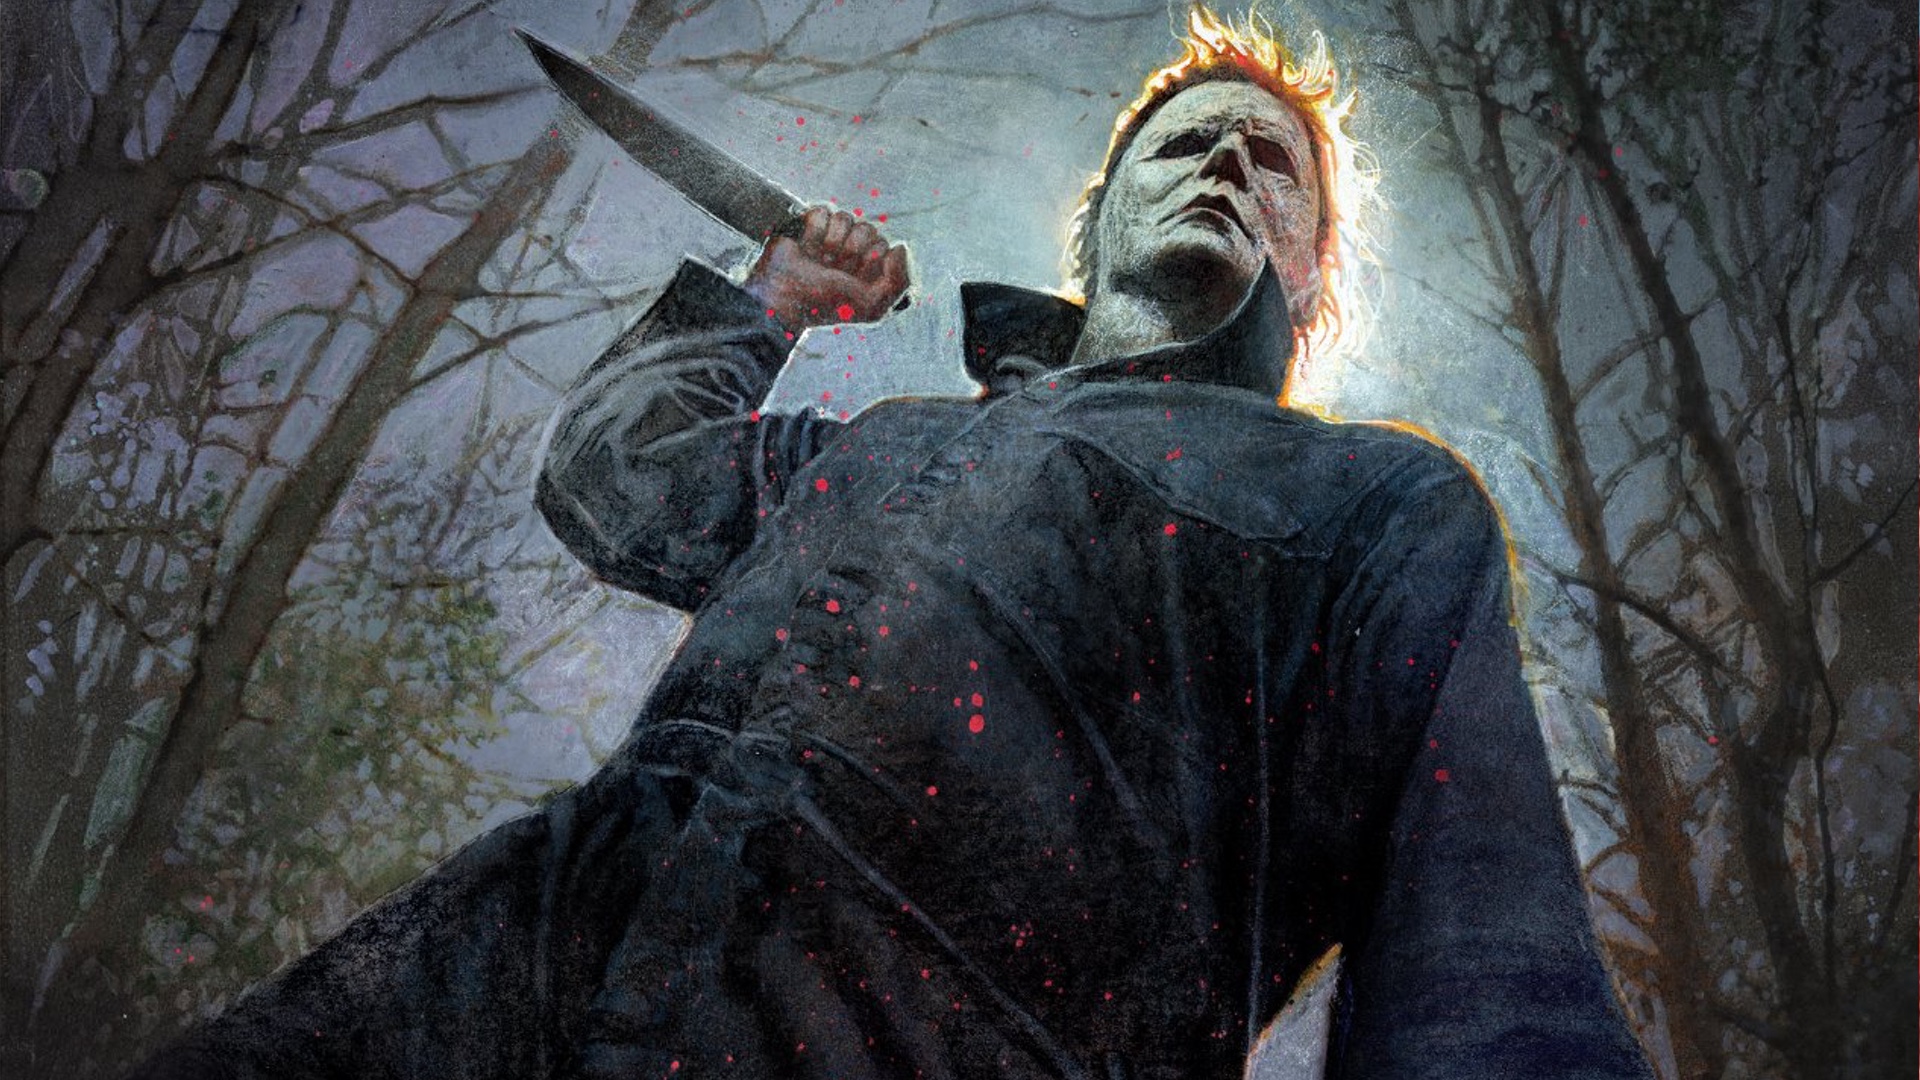 c739b0bec0dff4881daf559104f3b1d7 michael myers is read to kill in this comic con poster for halloween social